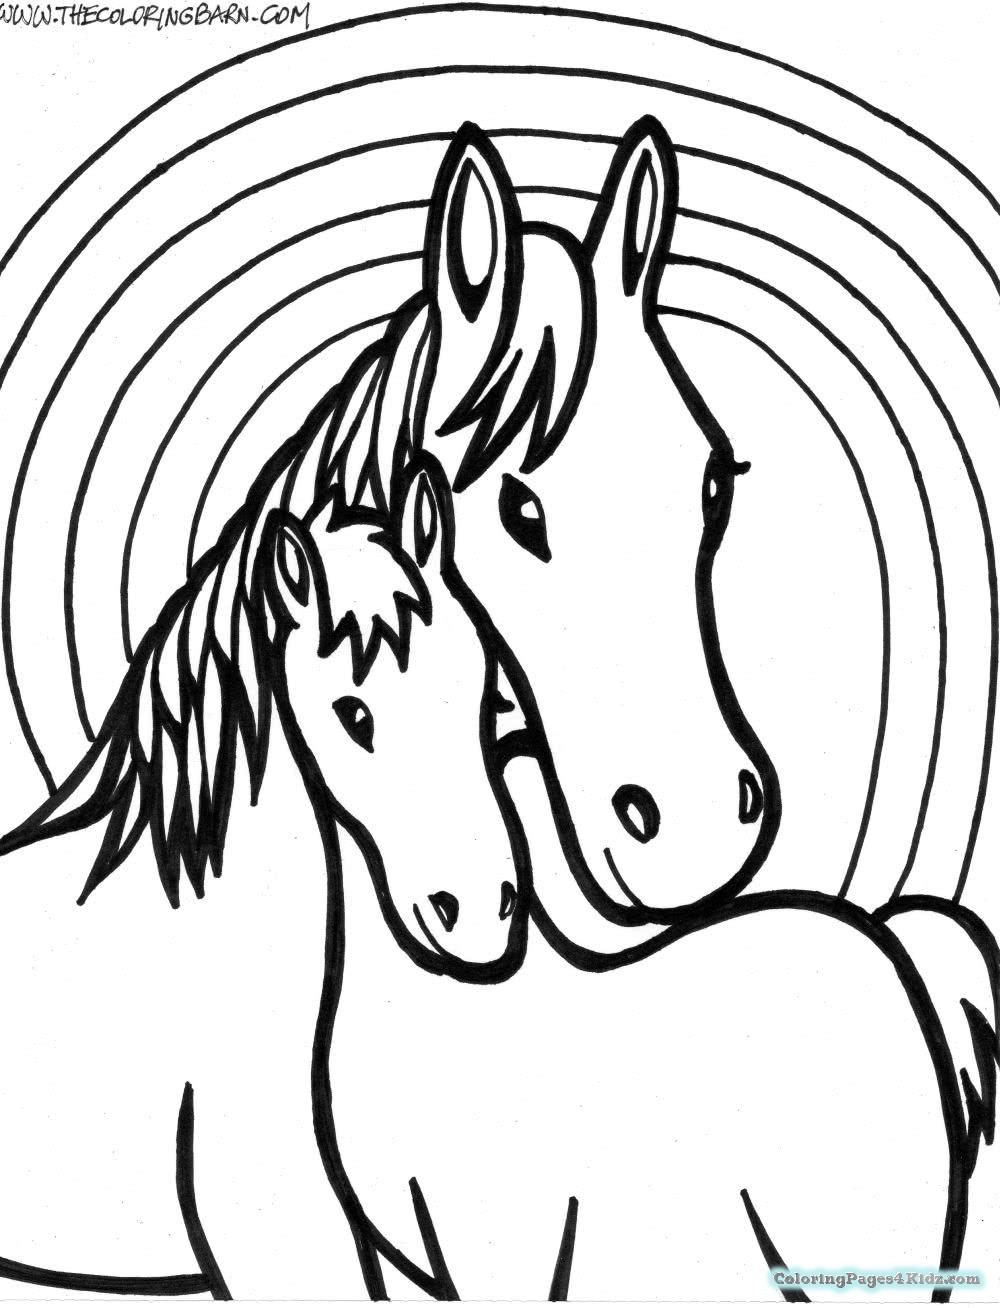 Baby Horse Coloring Pages
 Mommy Baby Horse Coloring Pages